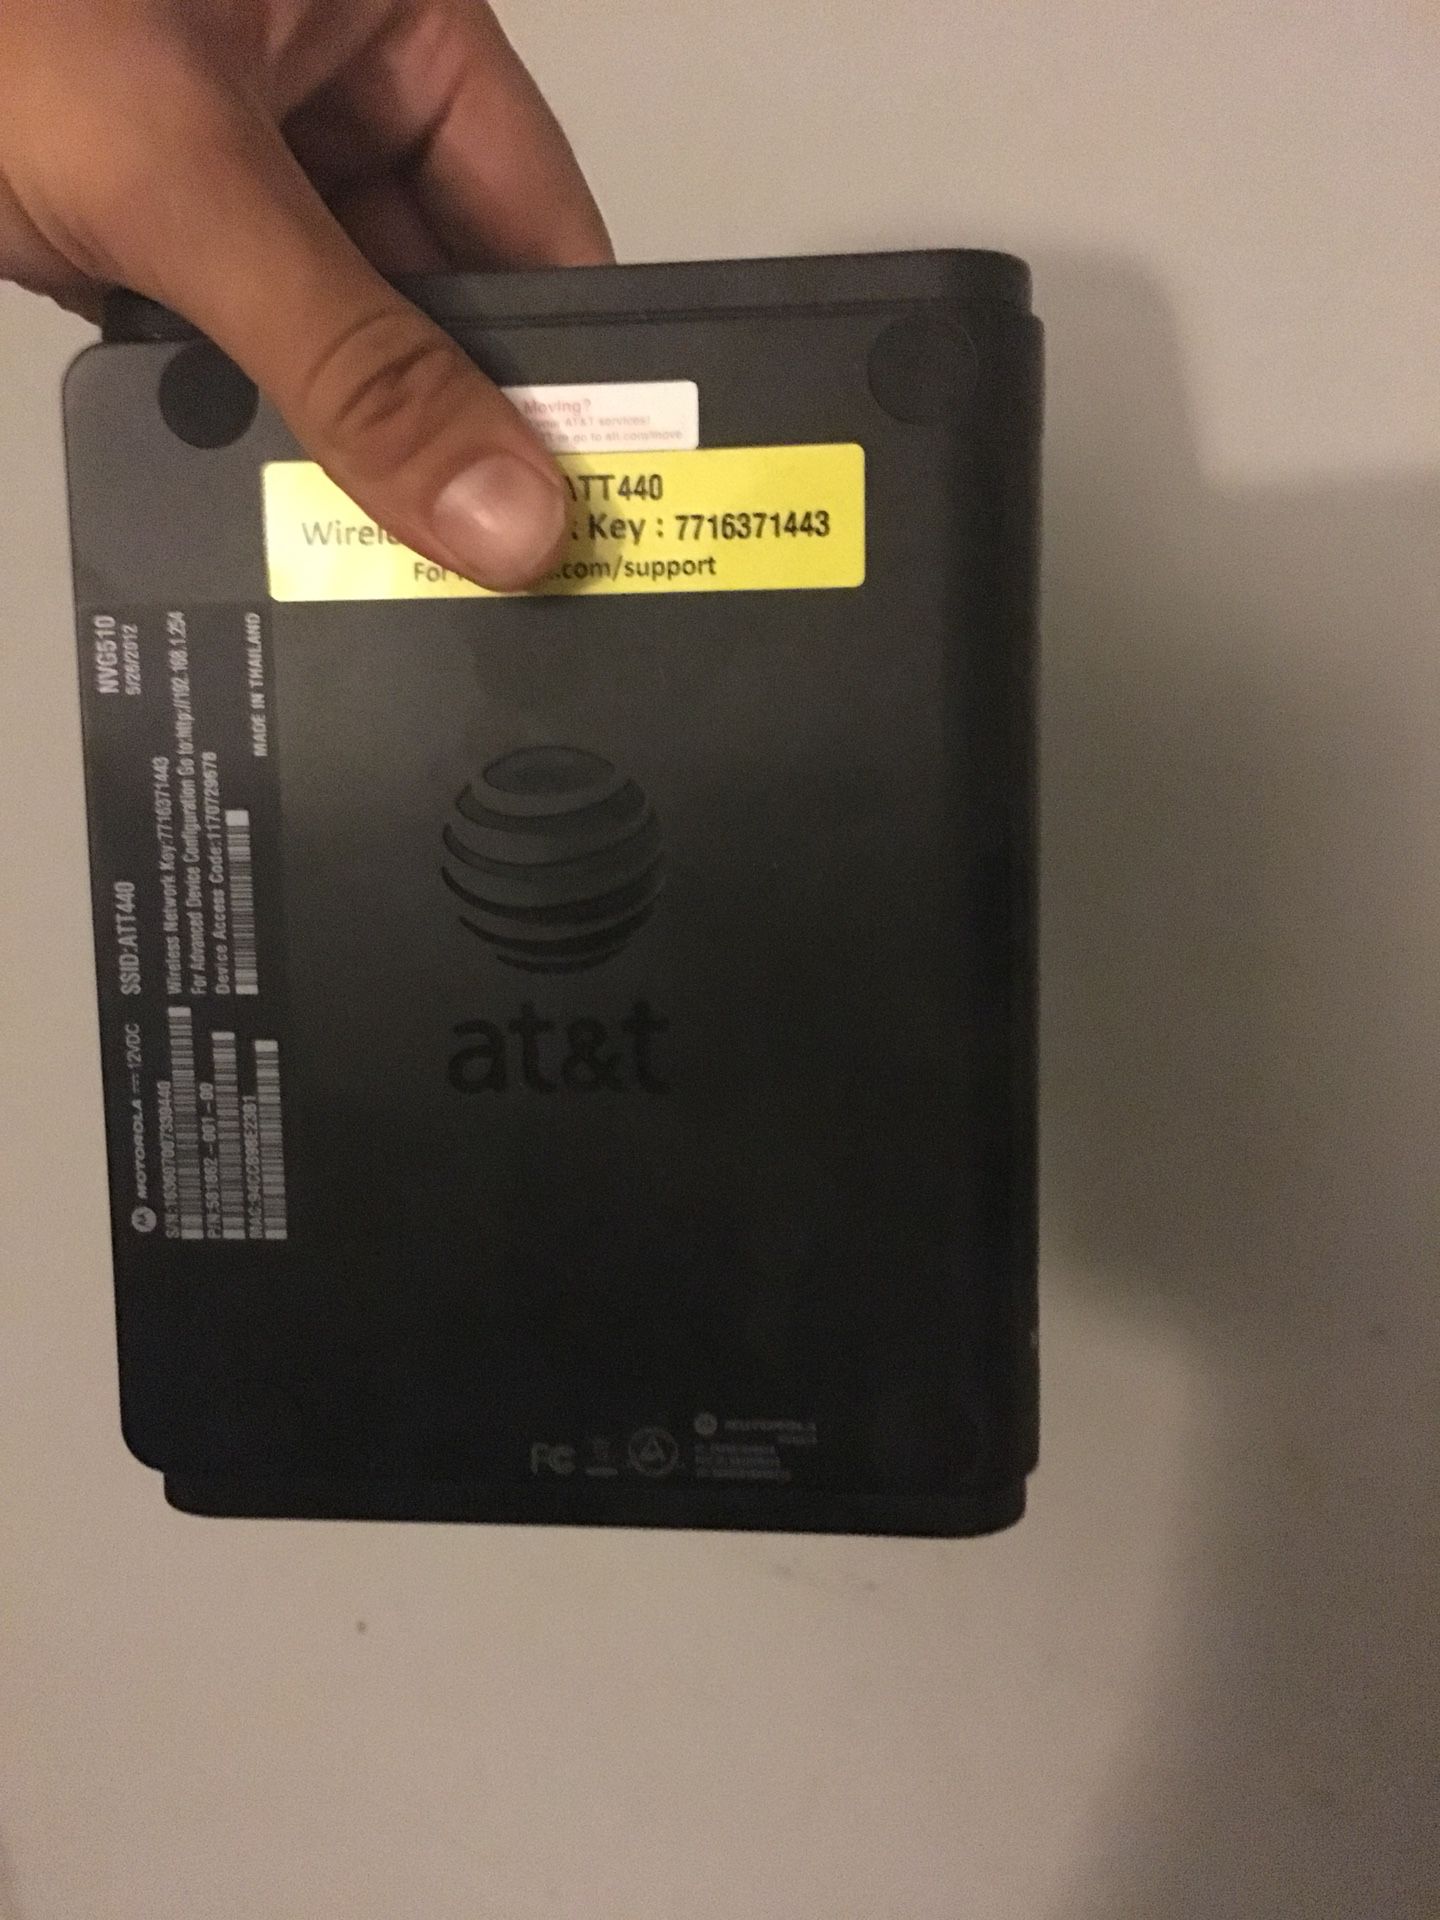 AT&T router used